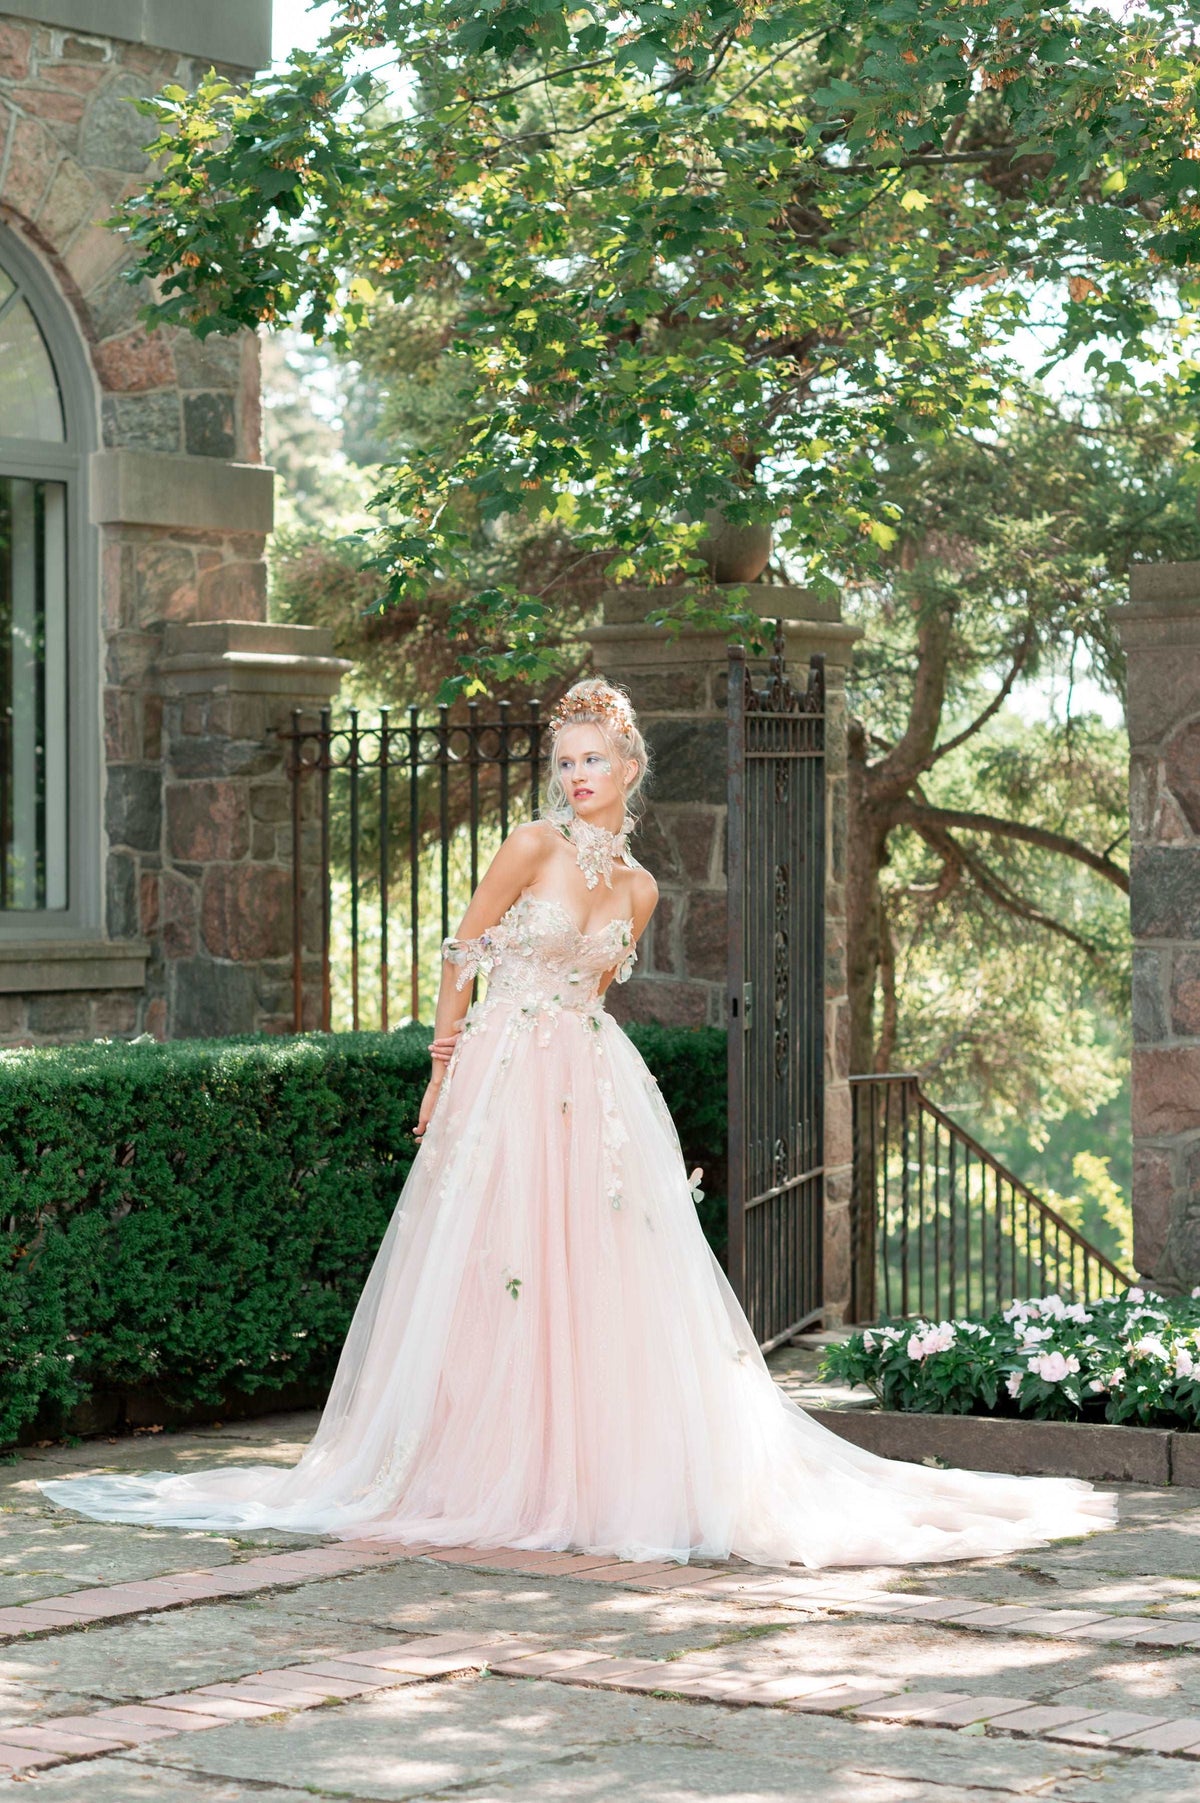 Whimsical fairy core inspired pink wedding dress for unconventionally cool brides. Catherine Langlois, Toronto, Canada